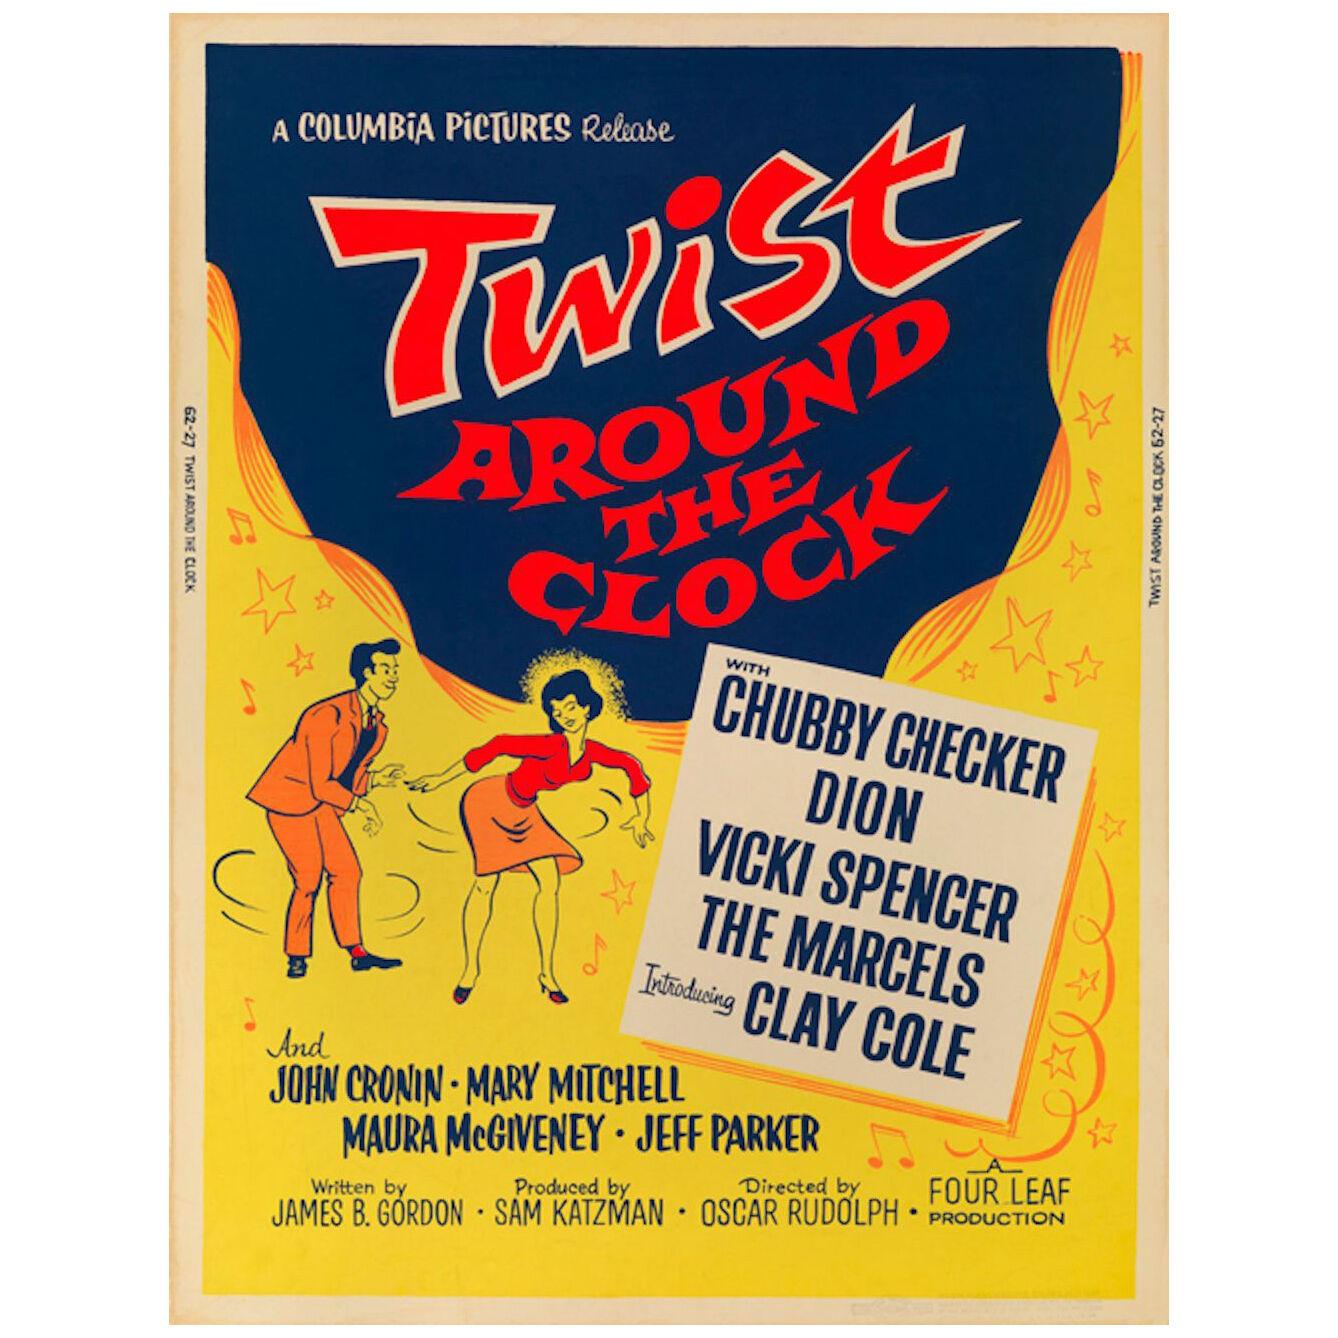 Original US film poster for the 1961 Musical Twist Around the Clock